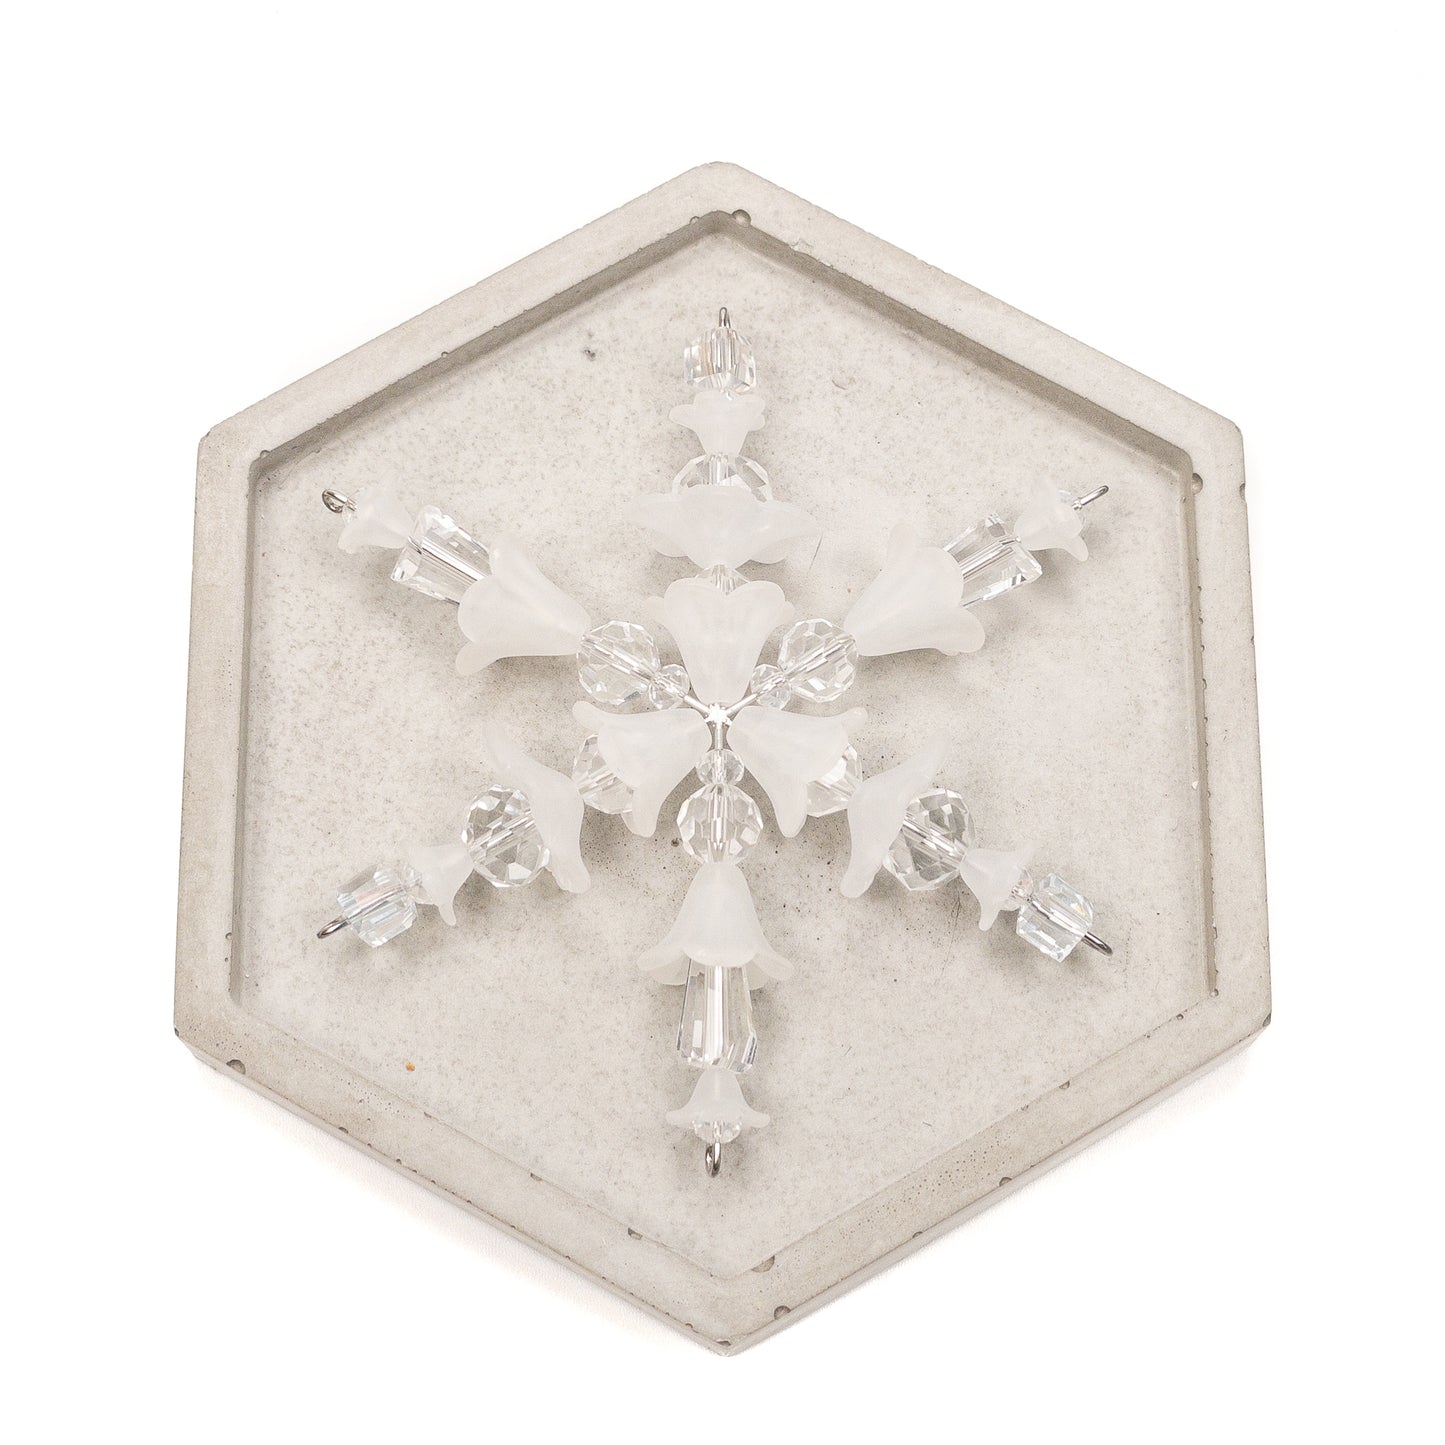 Hawaiian Quilt Snowflake Ornament Kit (3 Colors and 2 Options Available)